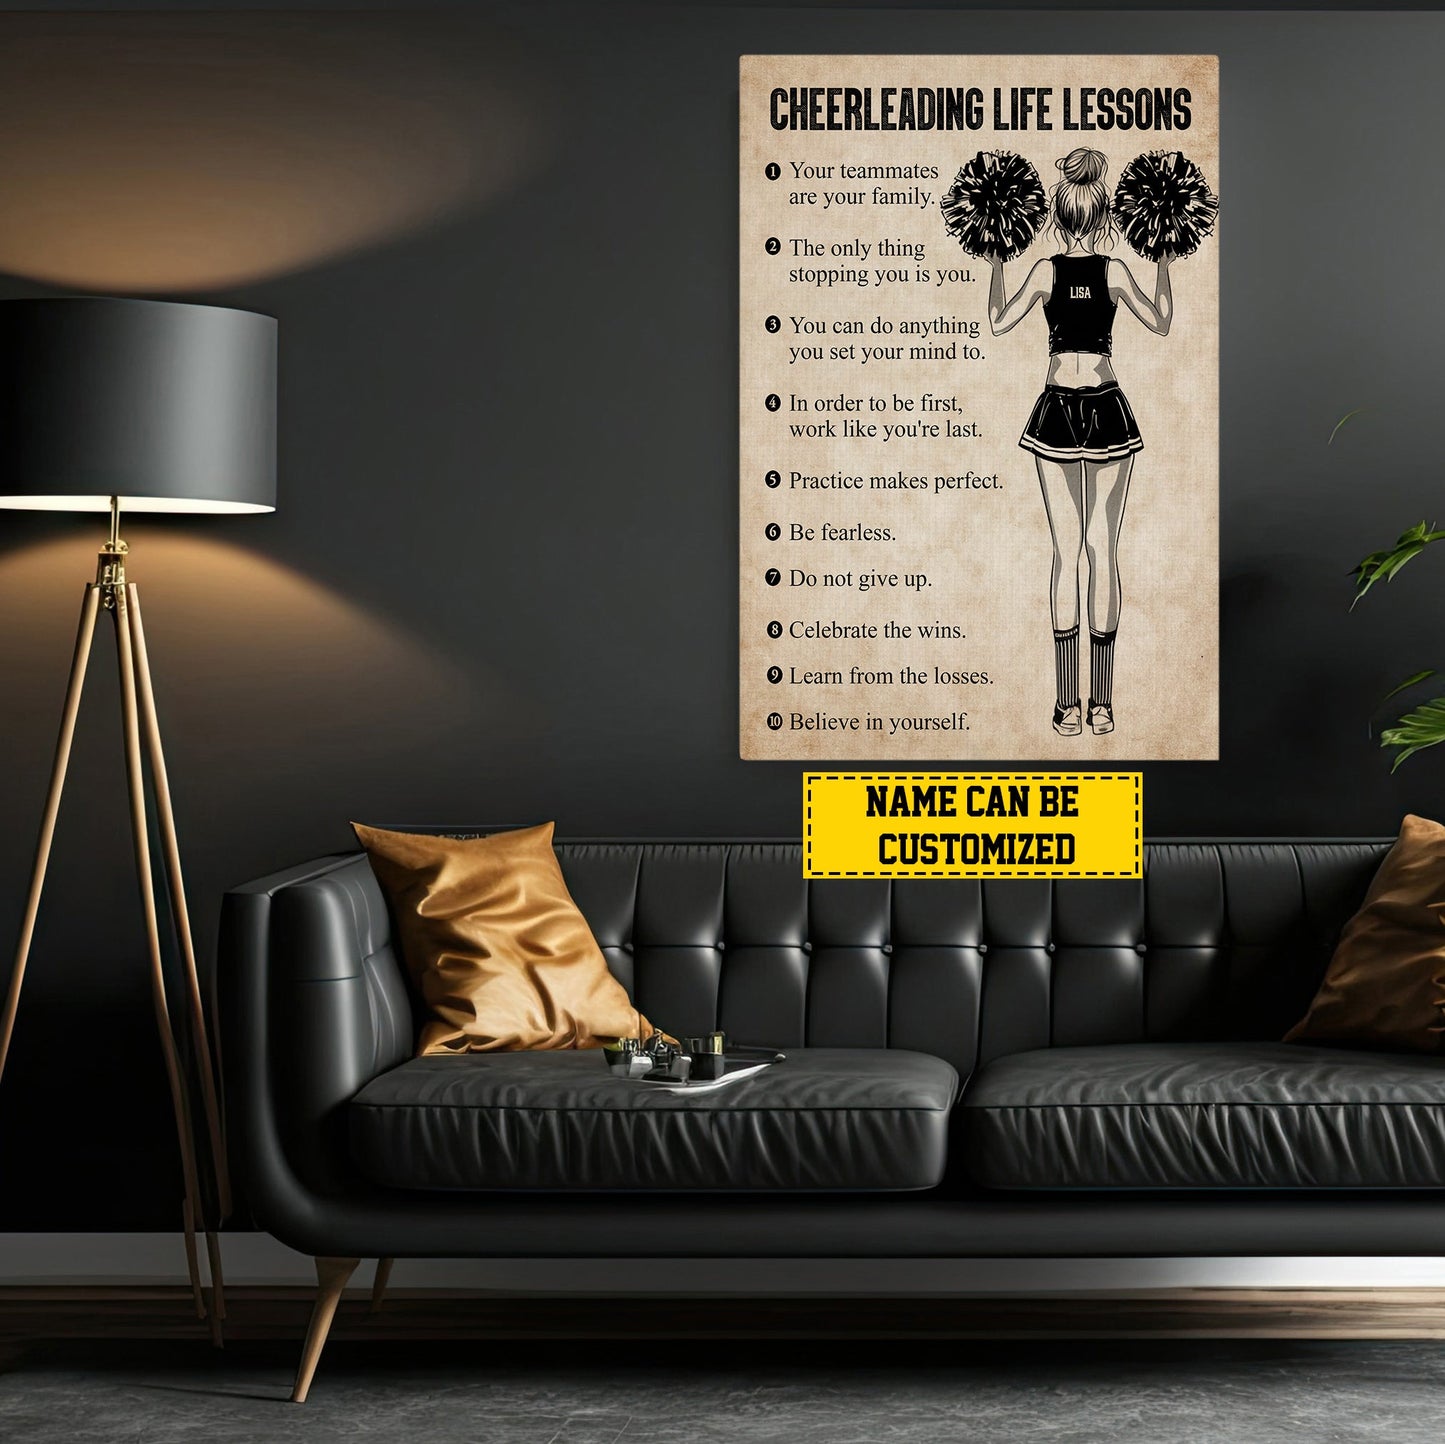 Cheerleading Life Lessons, Personalized  Motivational Cheerleading Canvas Painting, Inspirational Quotes Wall Art Decor, Poster Gift For Cheerleading Lovers